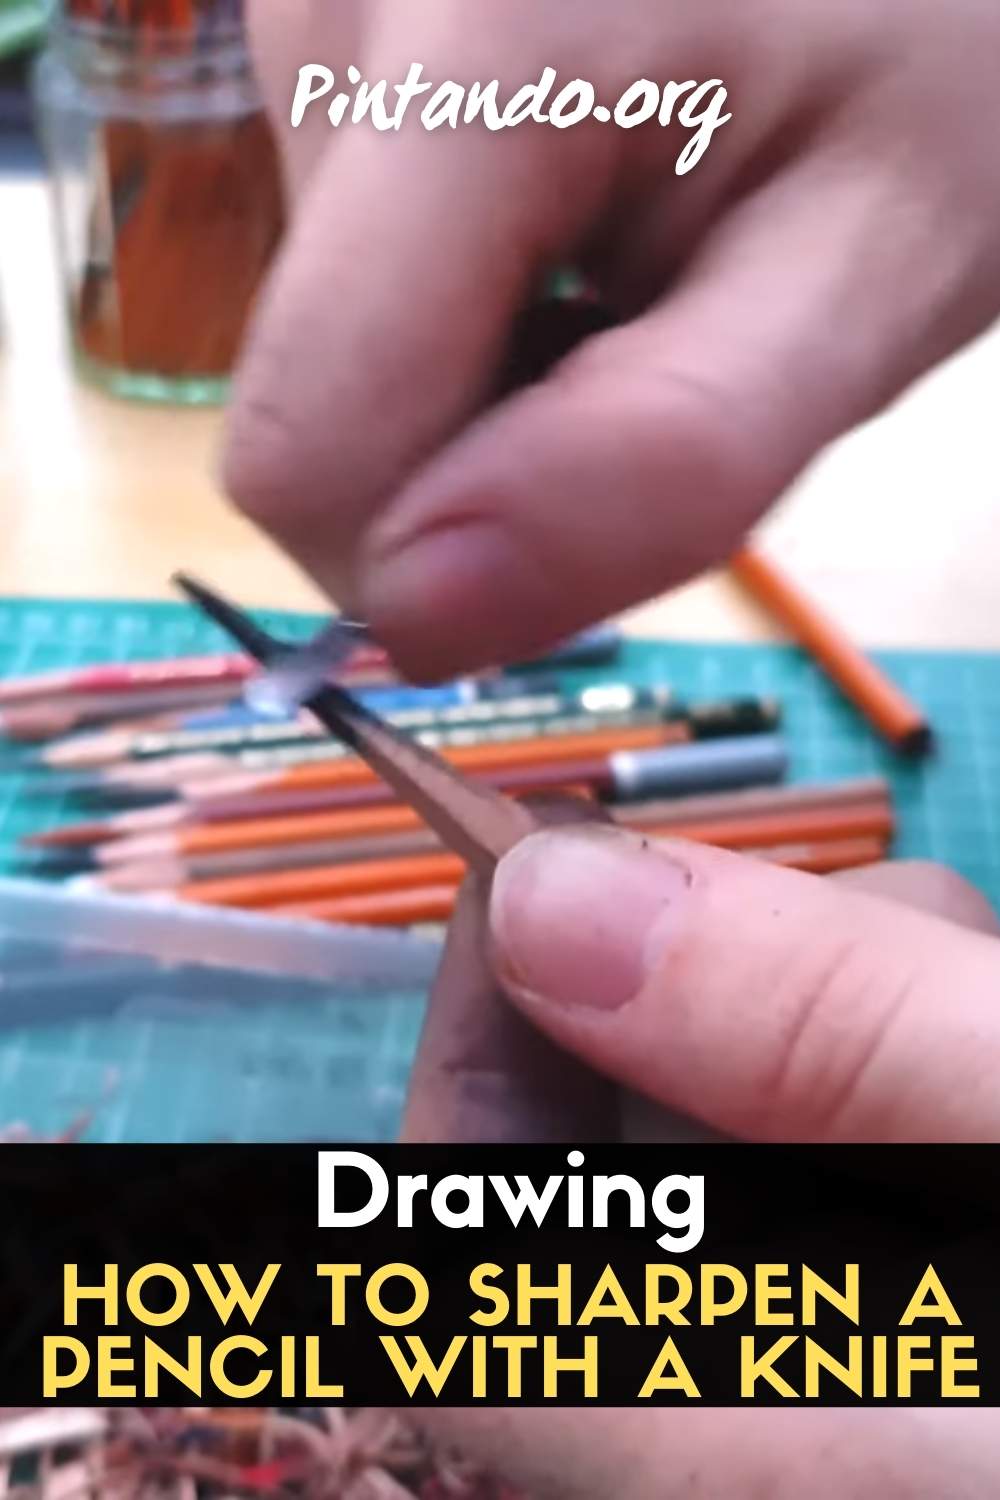 _How to Sharpen a Pencil With a Knife (for Drawing) (1)